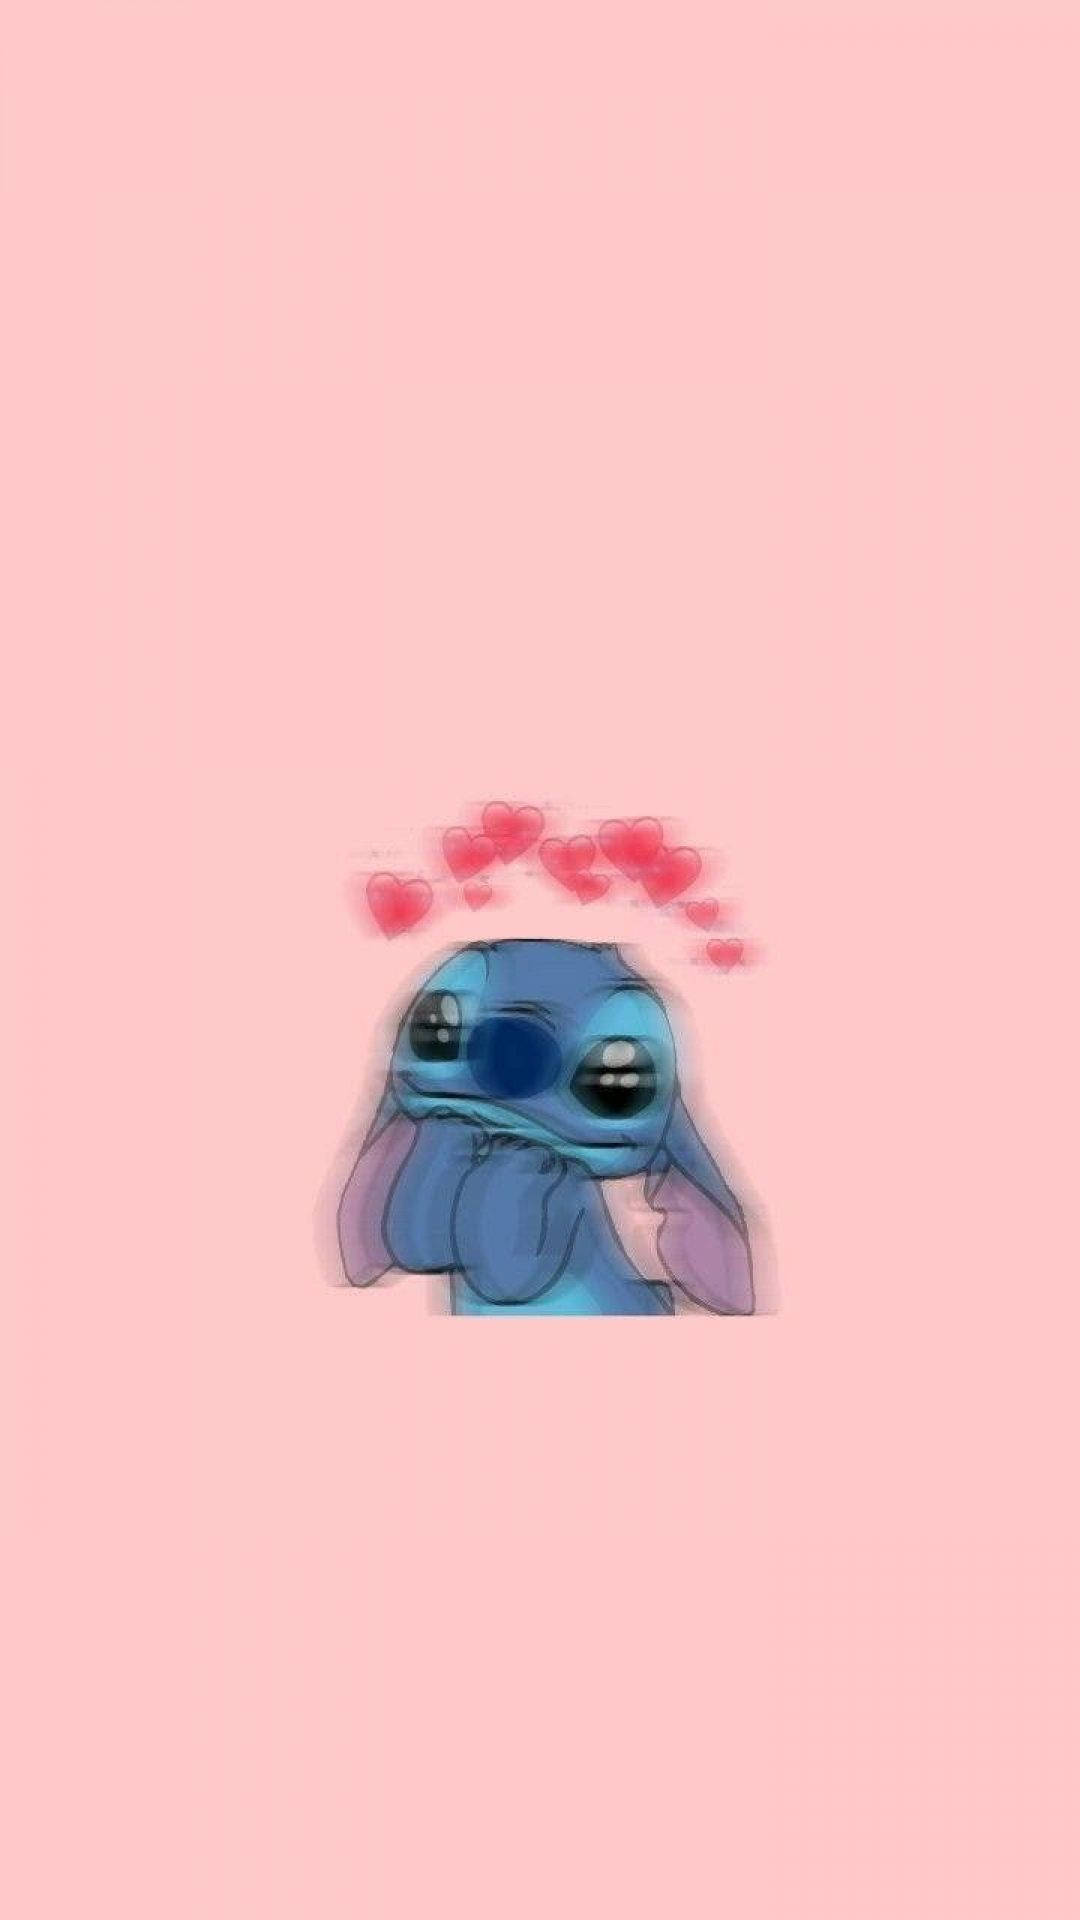 Cute Aesthetic Cartoon Adorable Stitch Picture